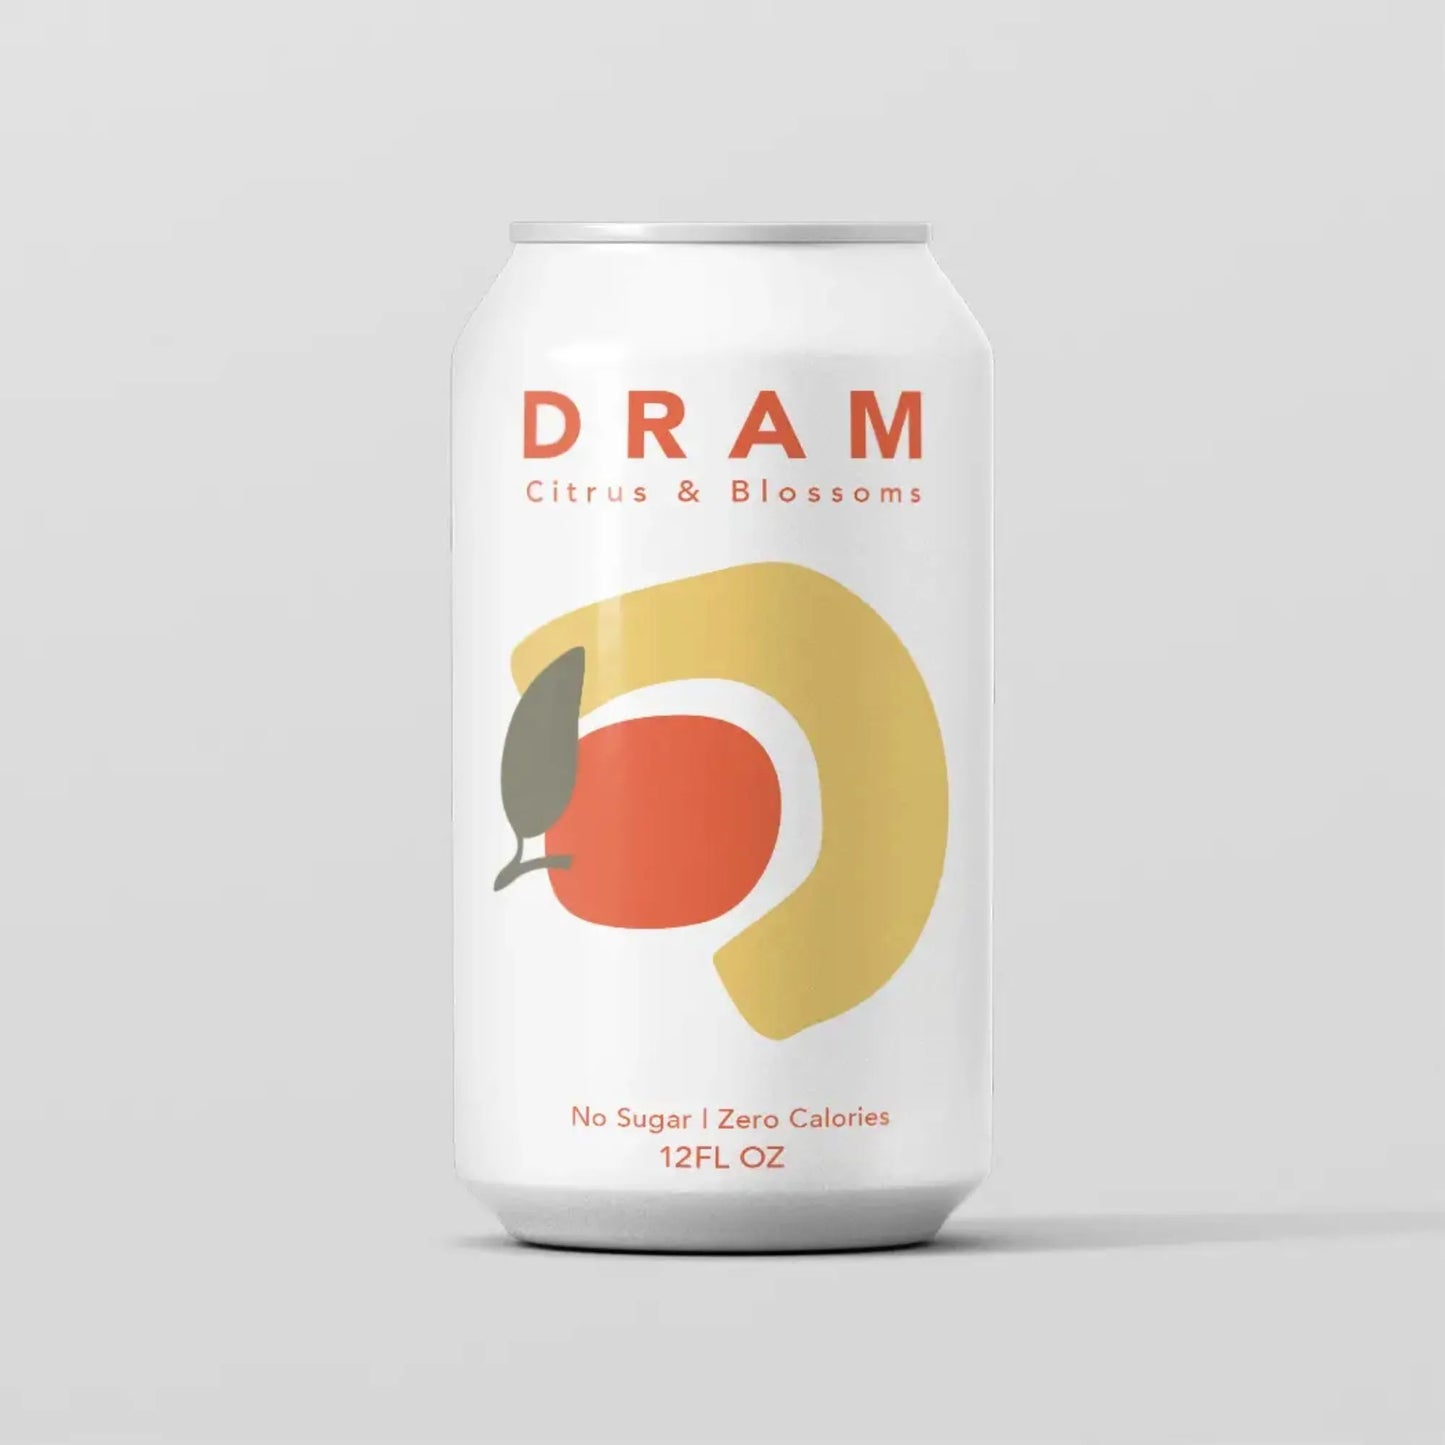 Citrus & Blossoms Sparkling Water by DRAM